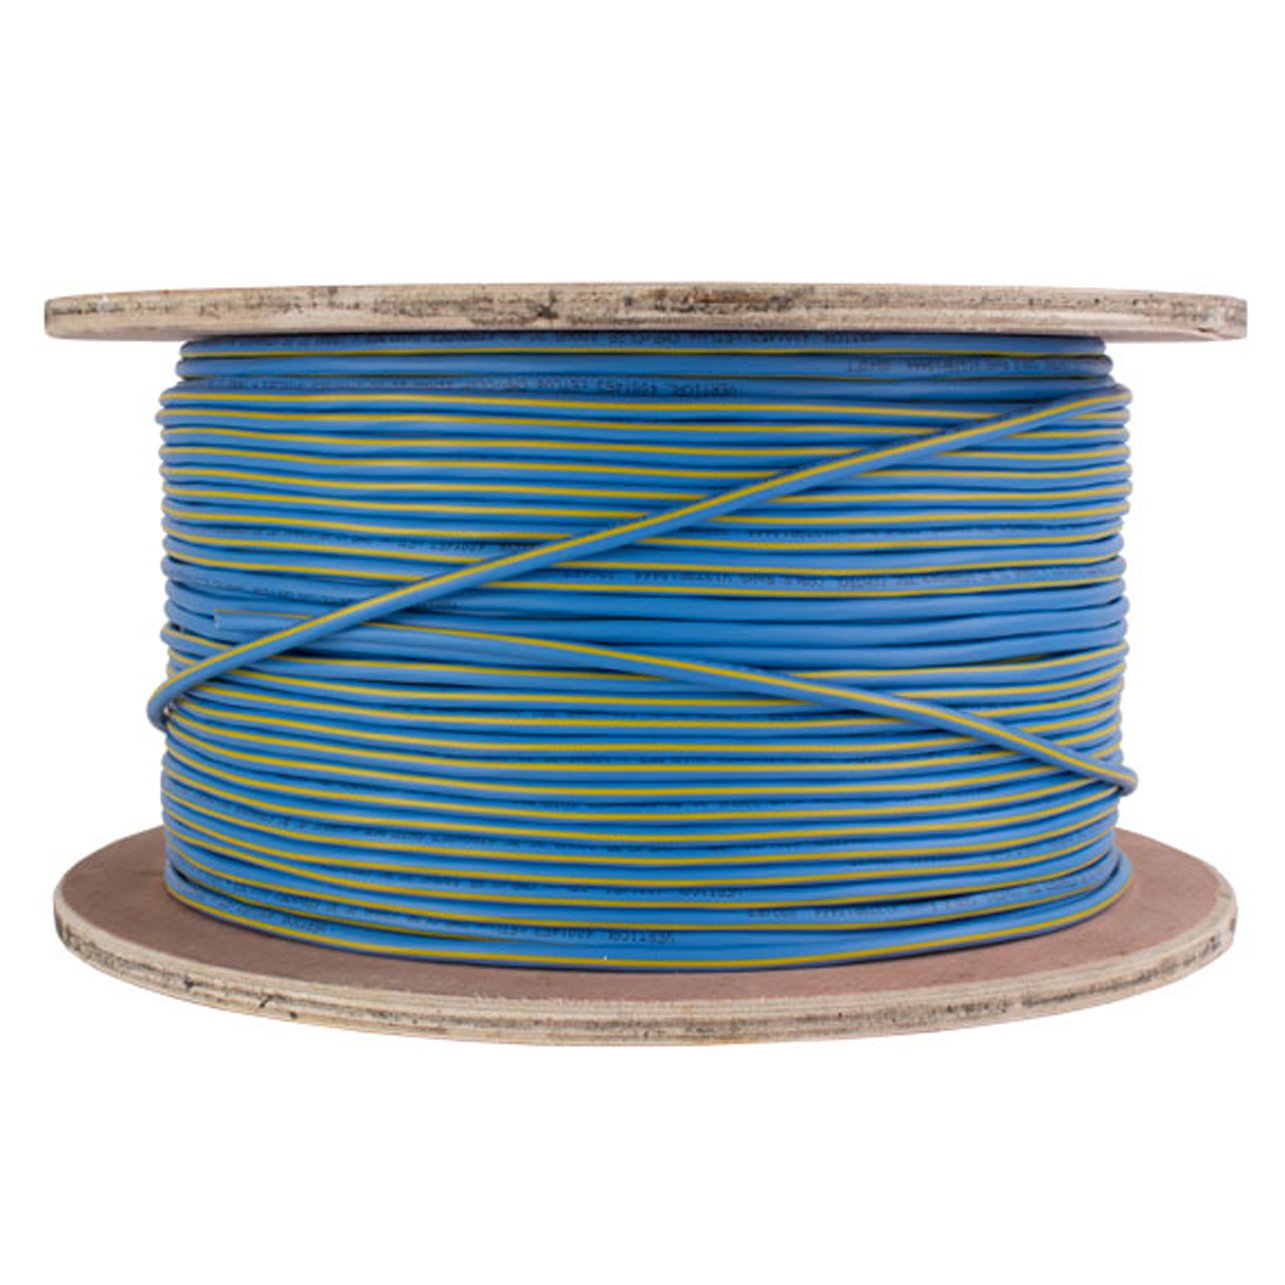 Vertical Cable Control Cable Plenum: 22AWG/2 (Shielded) Data + 18AWG/2 Power, Stranded Bare Copper Conductors, Teal with Yellow Stripe, 1000ft